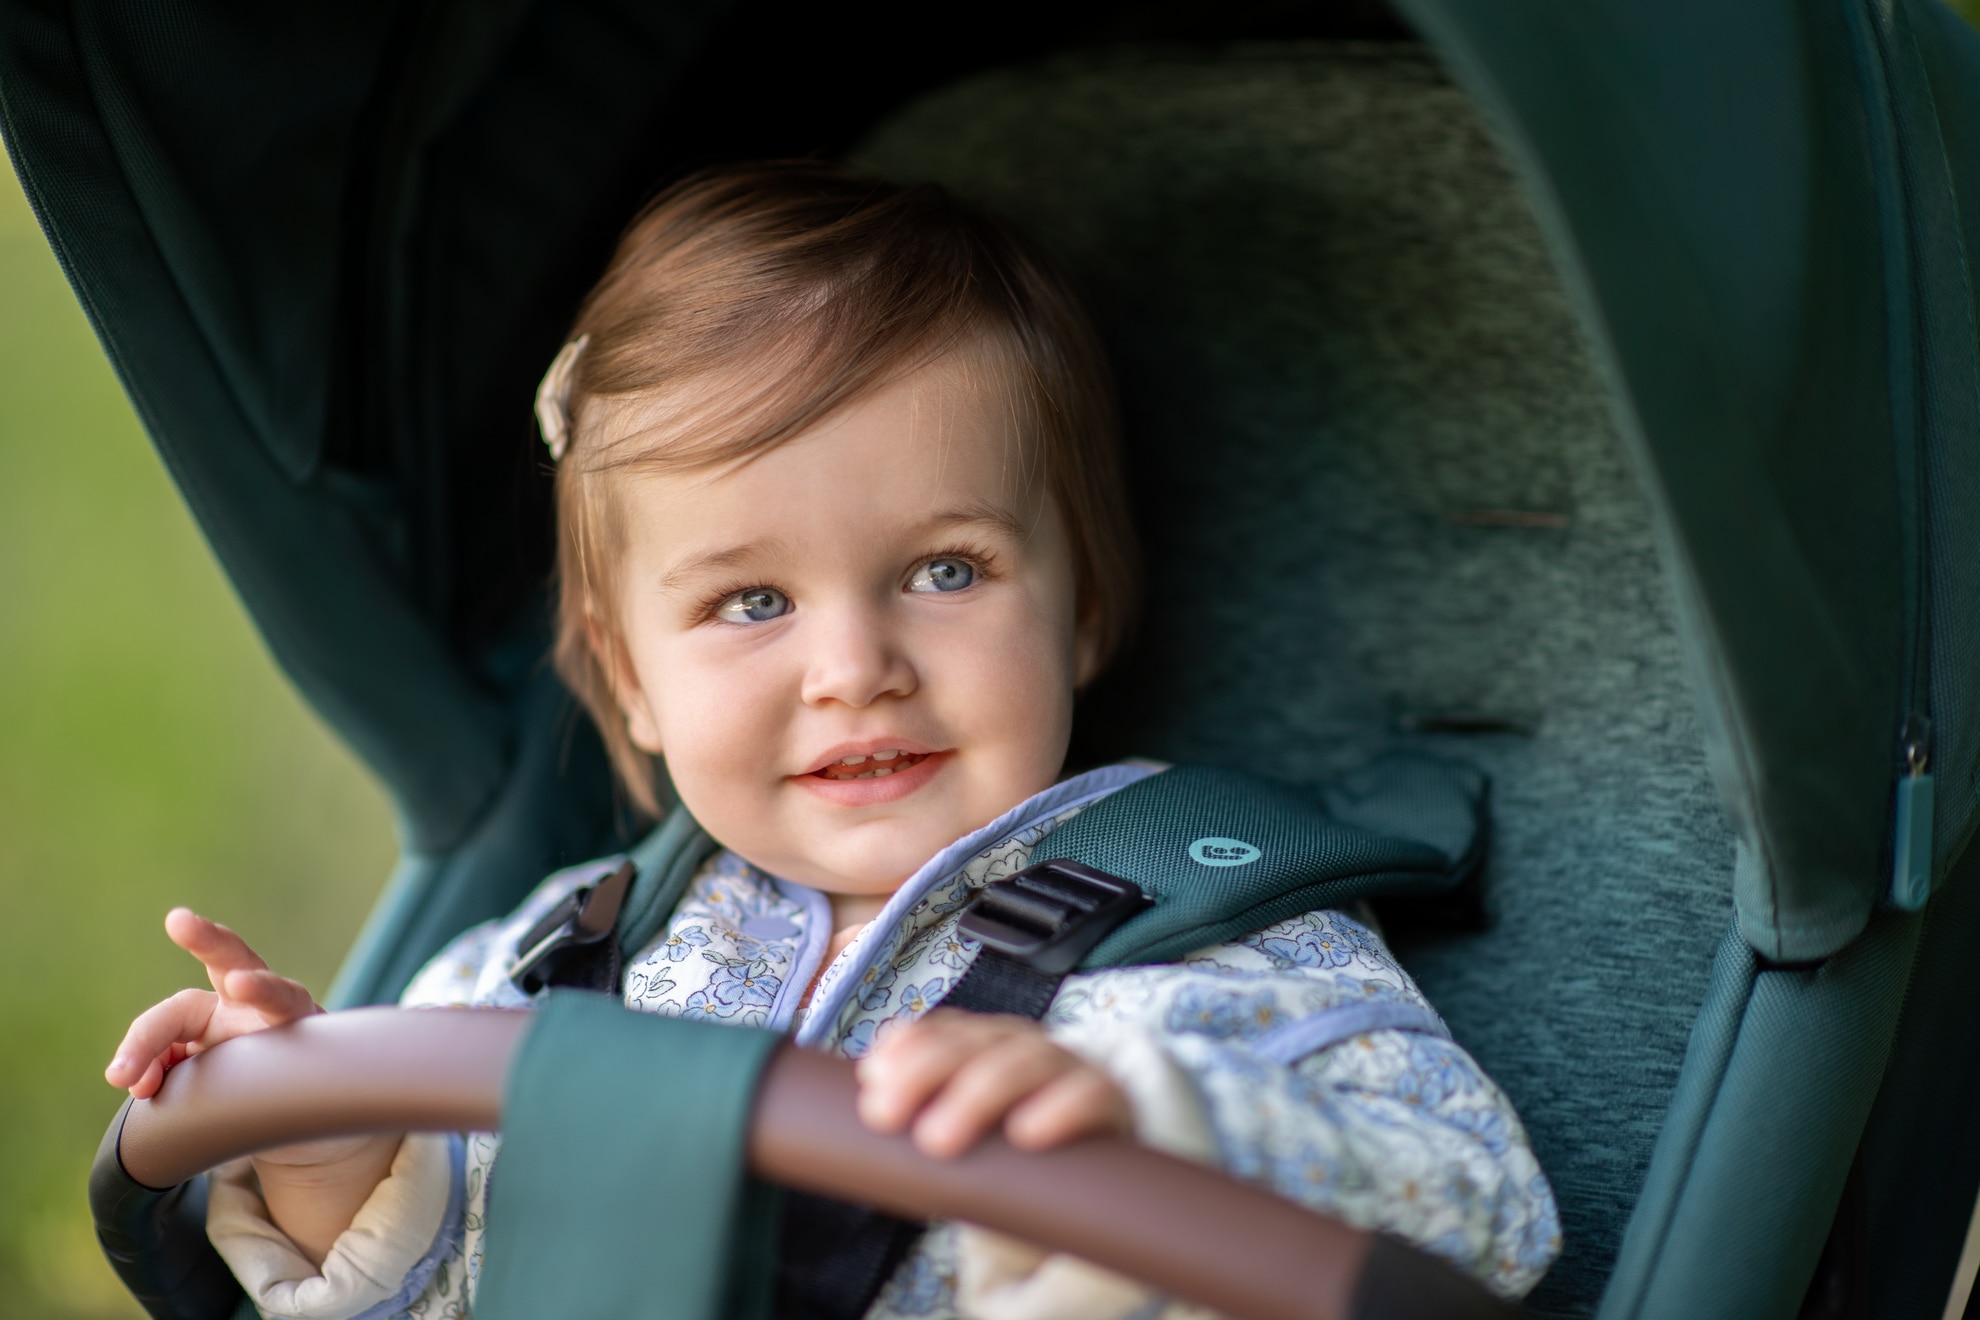 https://images.maxi-cosi.com/m/3ab1d1d0c21c05d6/PNG_72_DPI-MC1313_2022_maxicosi_stroller_Lila-XP_Lifestyle_Outdoor_girlinseatsmiling_Landscape.png